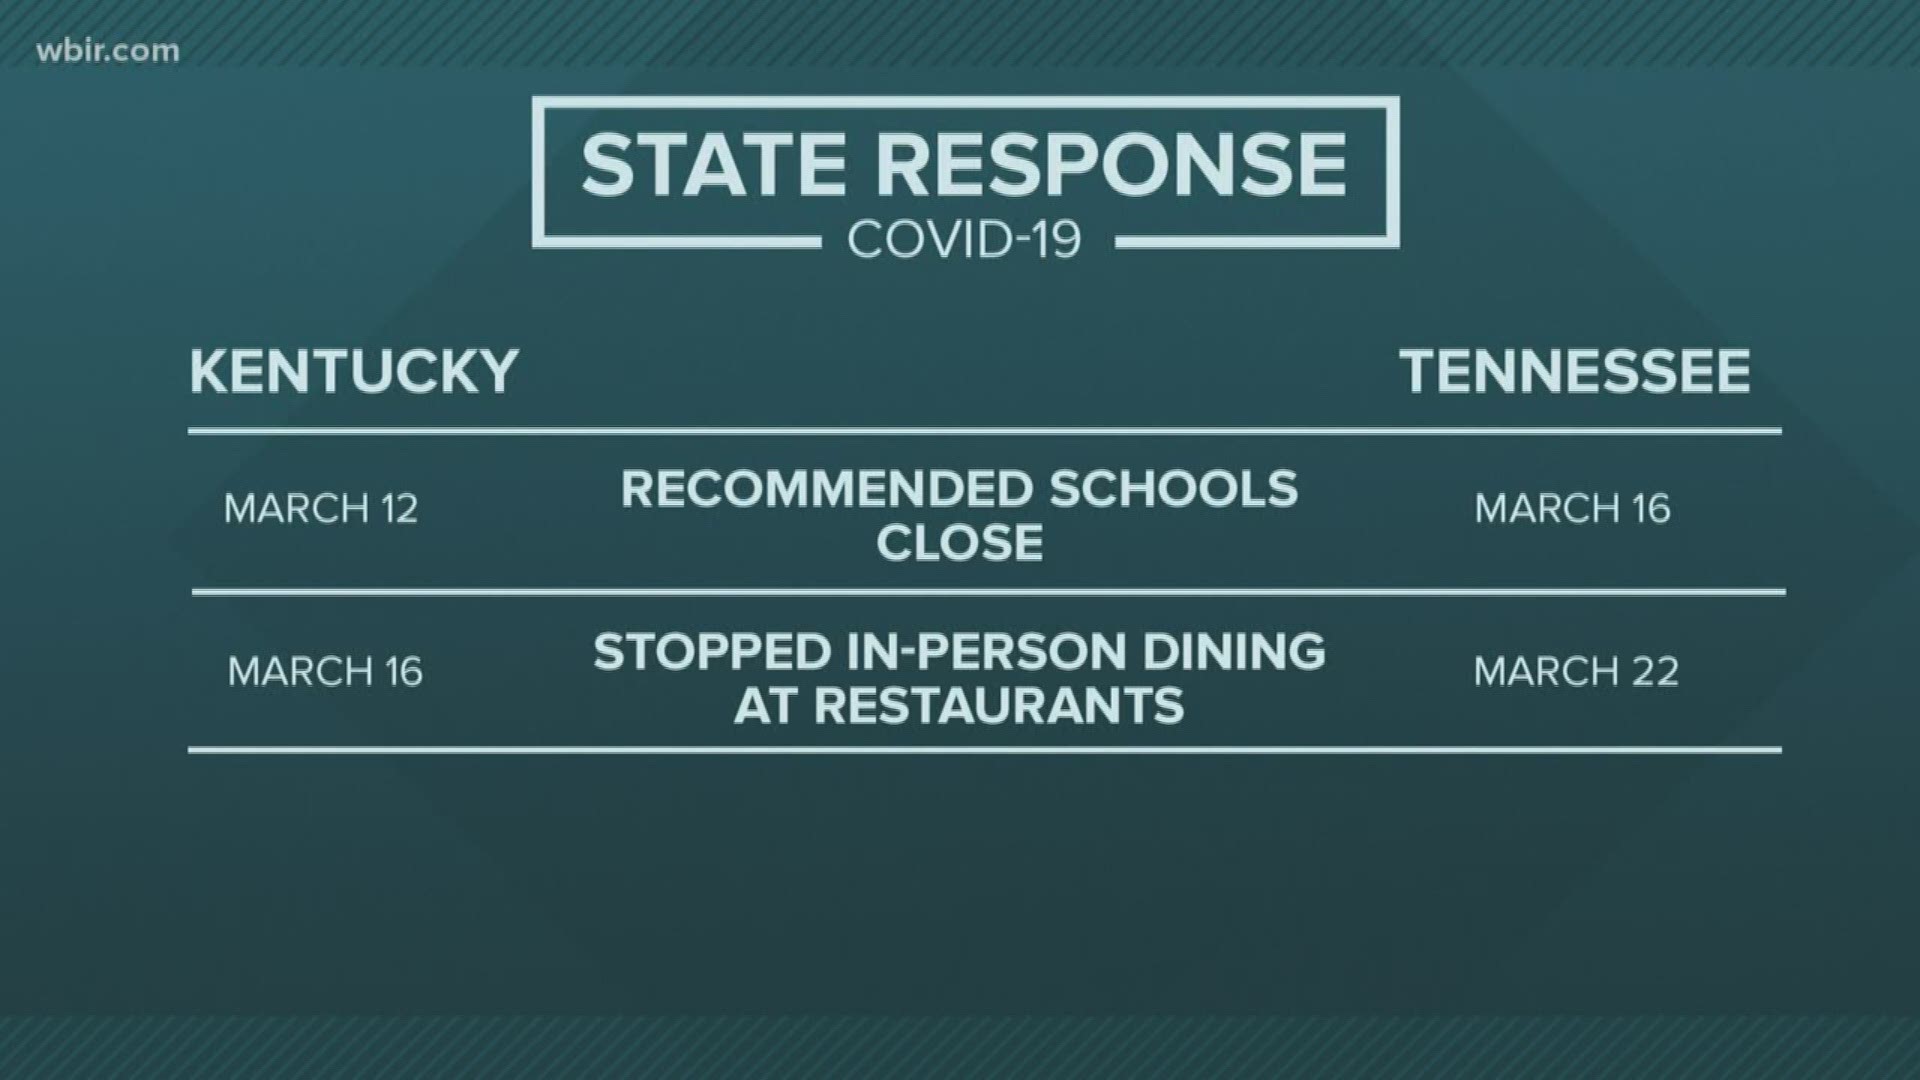 Comparing how KY has responded vs. TN has responded to the coronavirus.